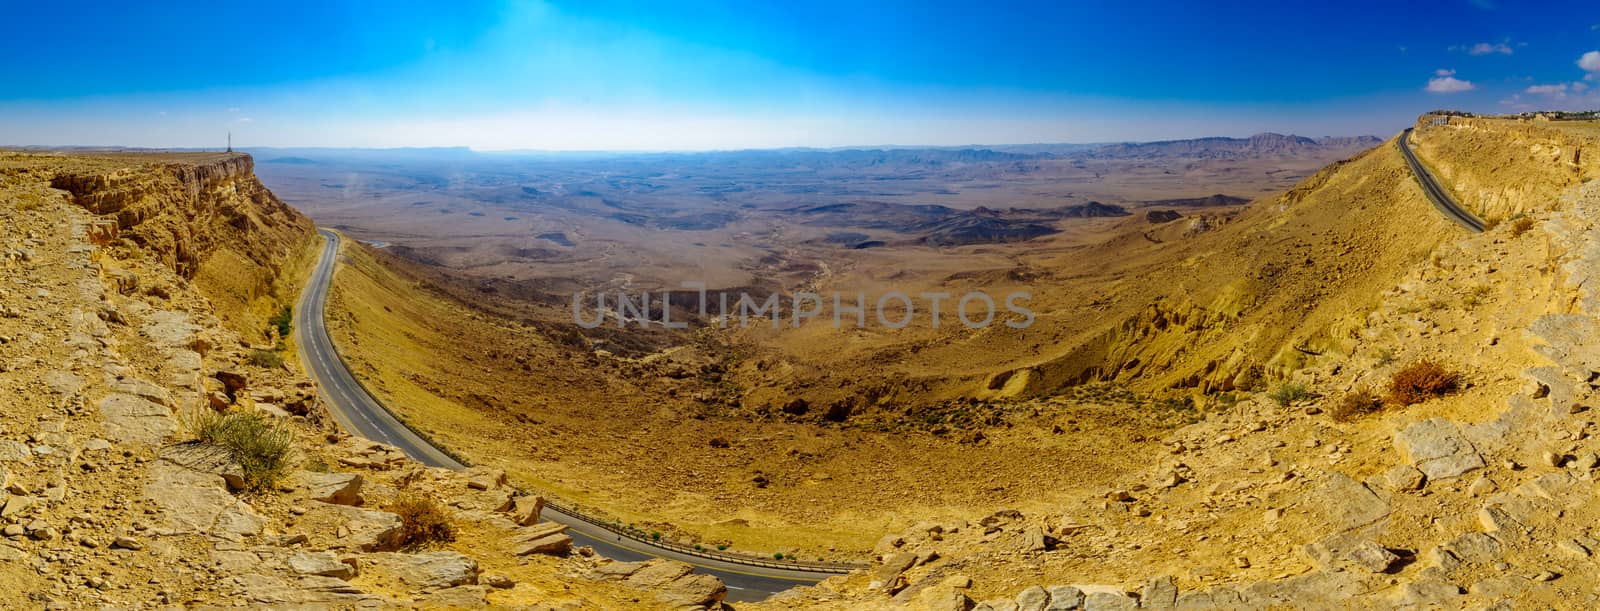 Panoramic view of cliffs, landscape, and road, Makhtesh (crater) by RnDmS